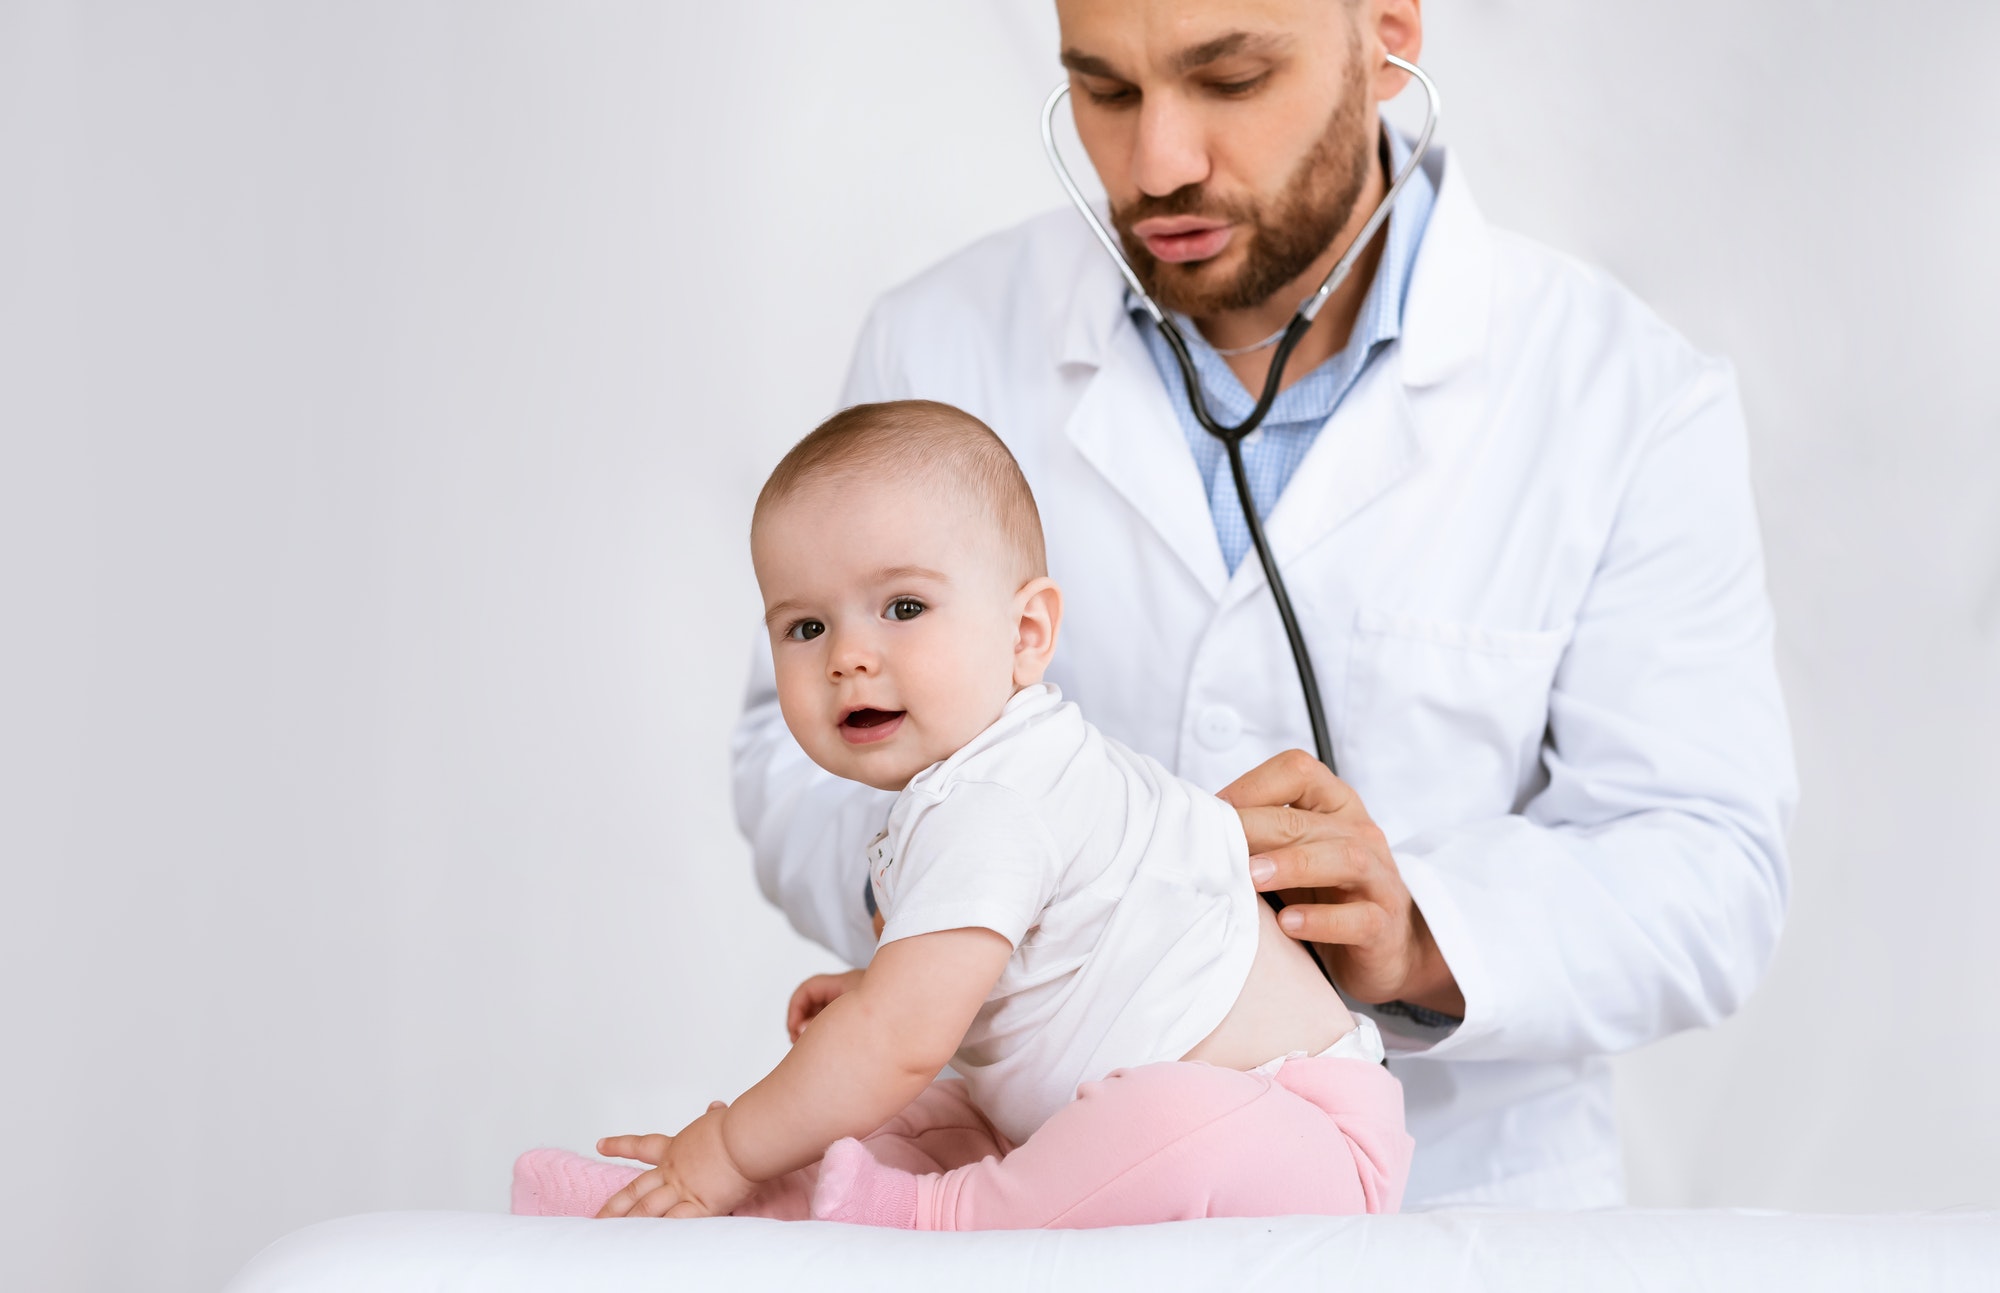 Doctor Examining Baby Listening To Her Lungs Over White Background